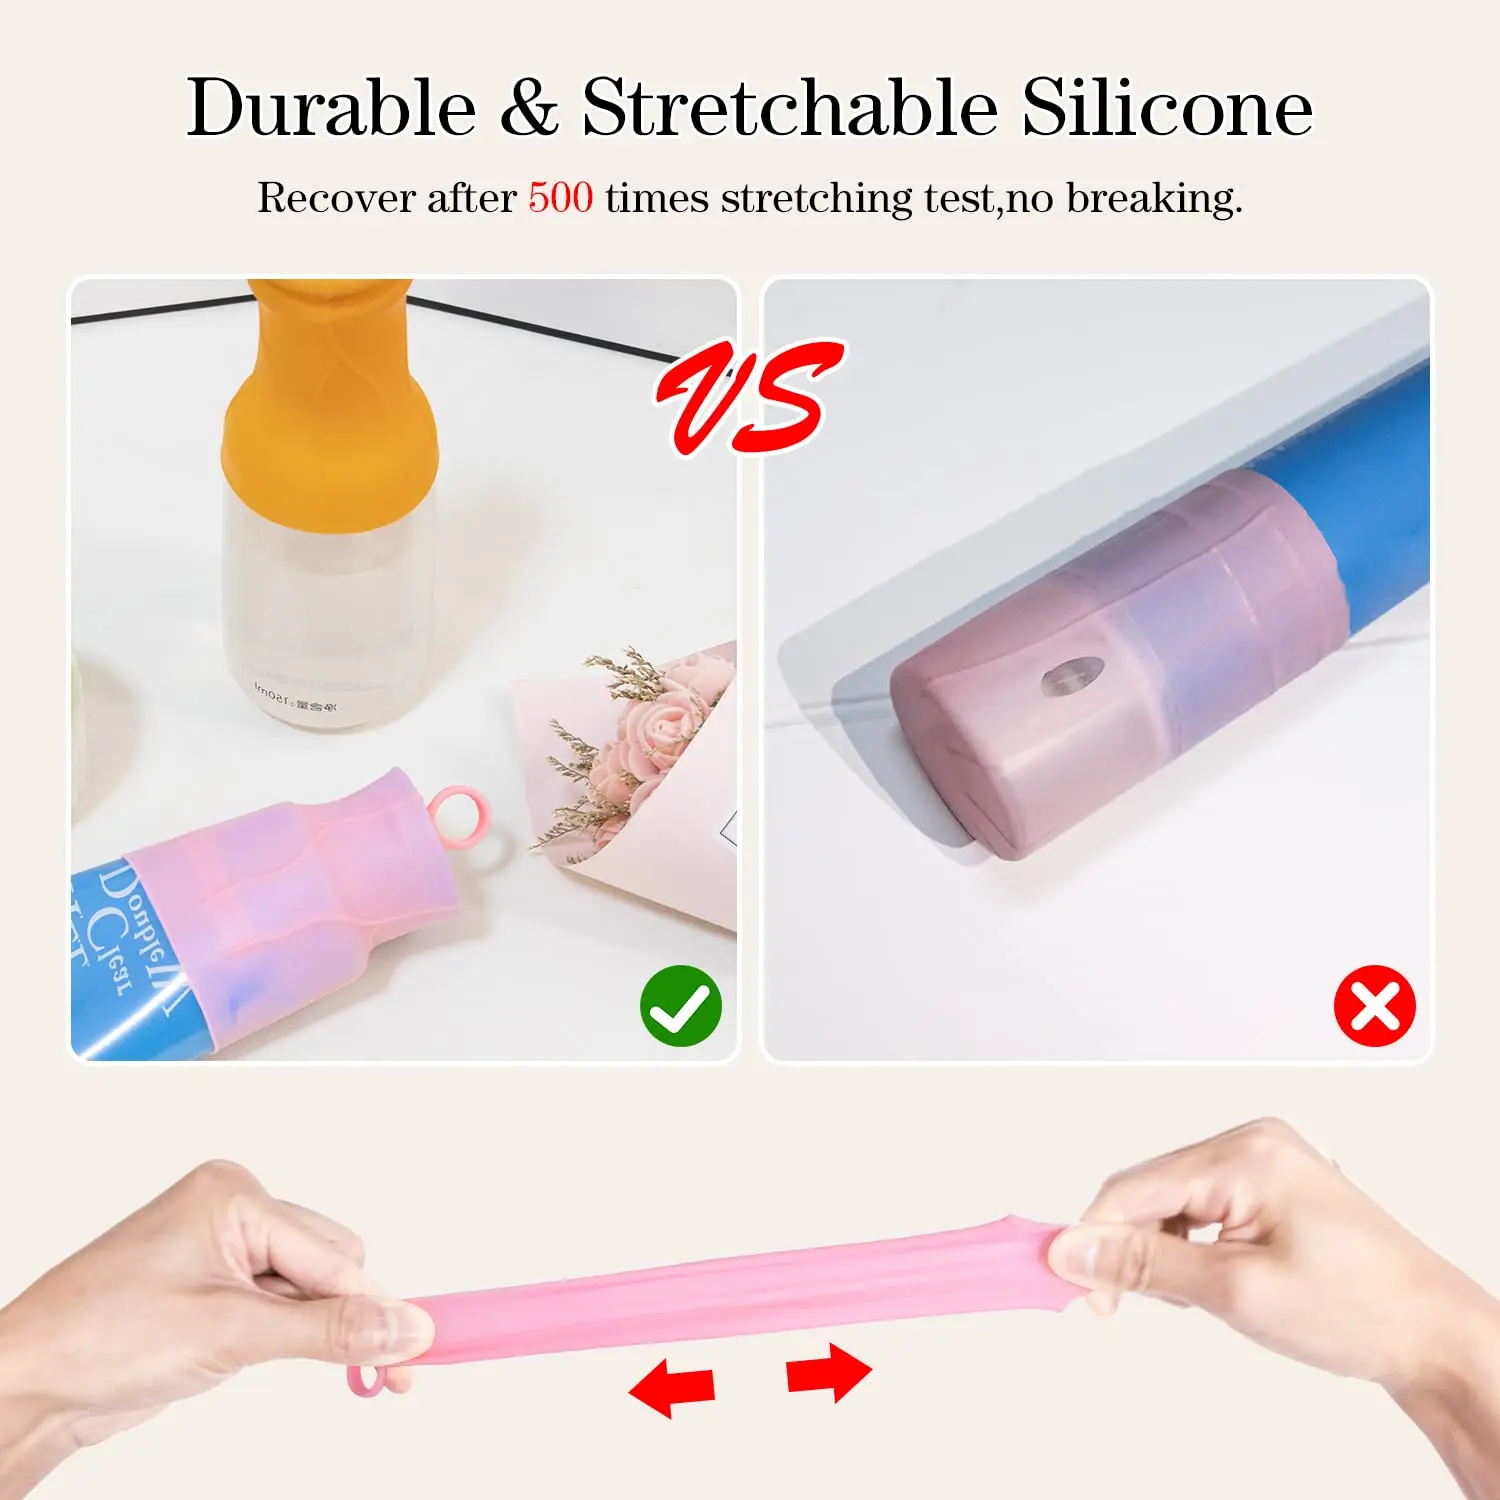 8PcsSilicone Travel Bottle Covers Leak Proof Sleeves for Travel Container  in Luggage Reusable Silione Accessory for Travel Toiletries Shampoo Bottles